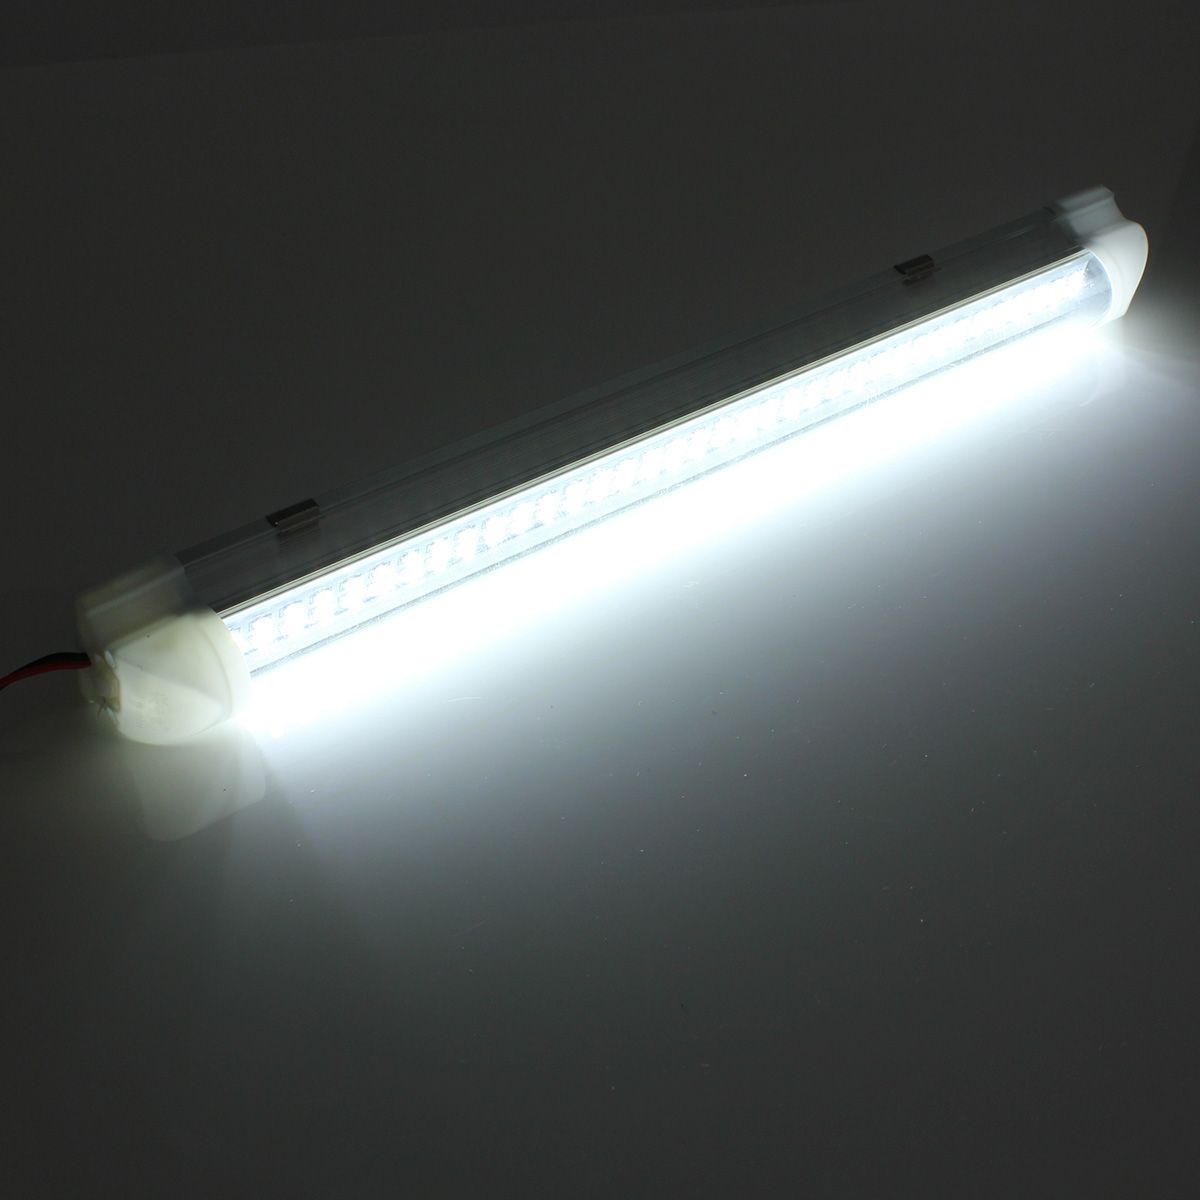 Universal-Interior-34cm-LED-Light-Strip-Lamp-White-4Pcs-with-ONOFF-Switch-for-Car-Auto-Caravan-Bus-1406613